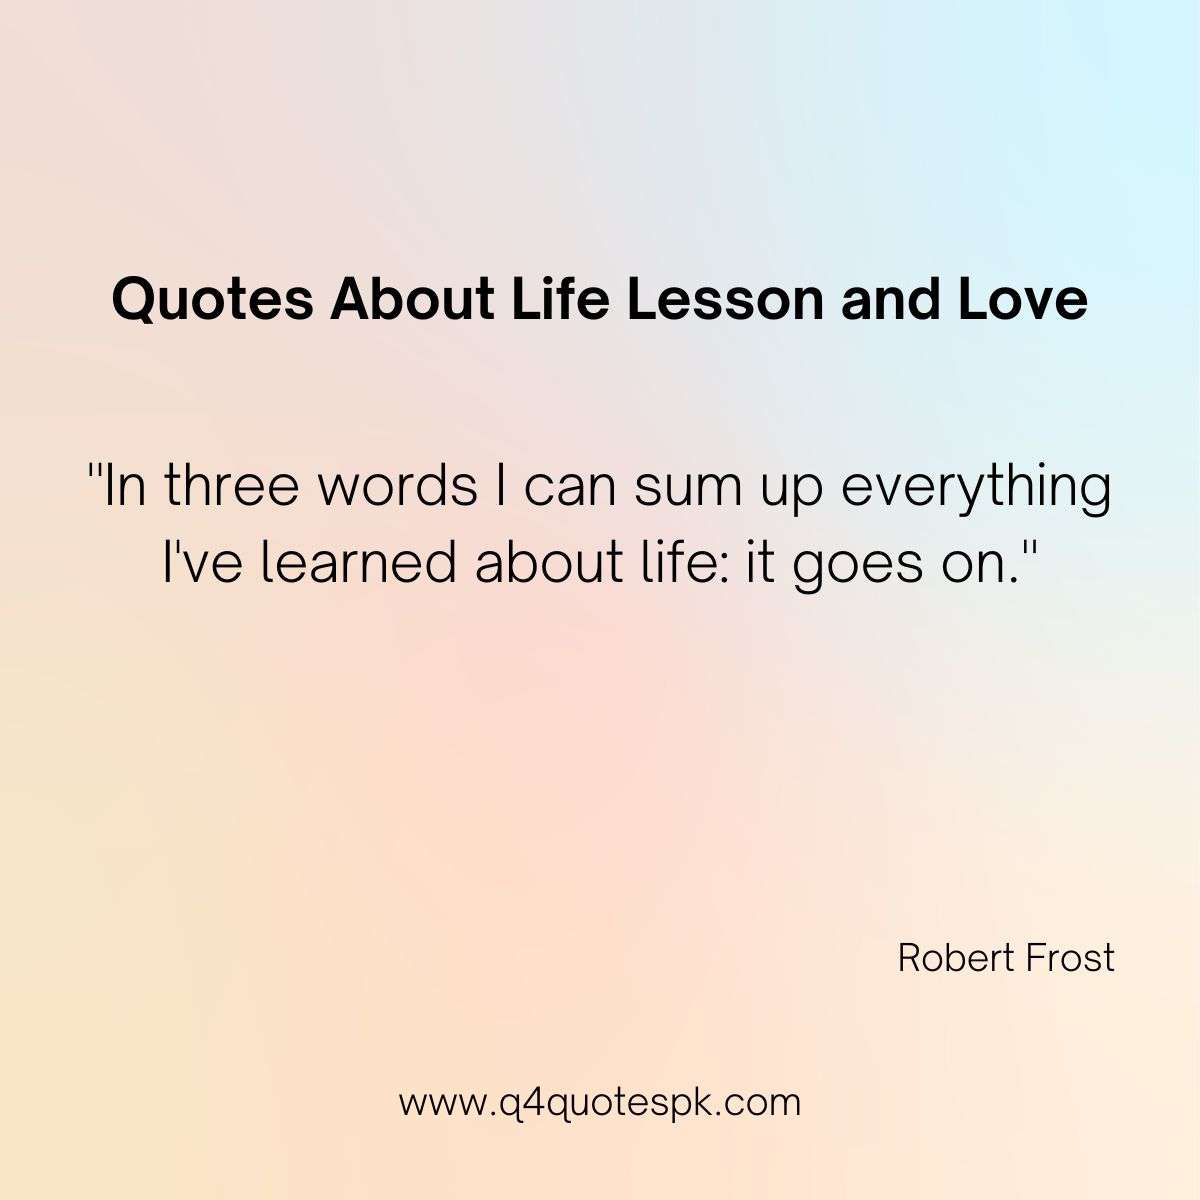 20 Quotes About Life Lesson and Love with Image